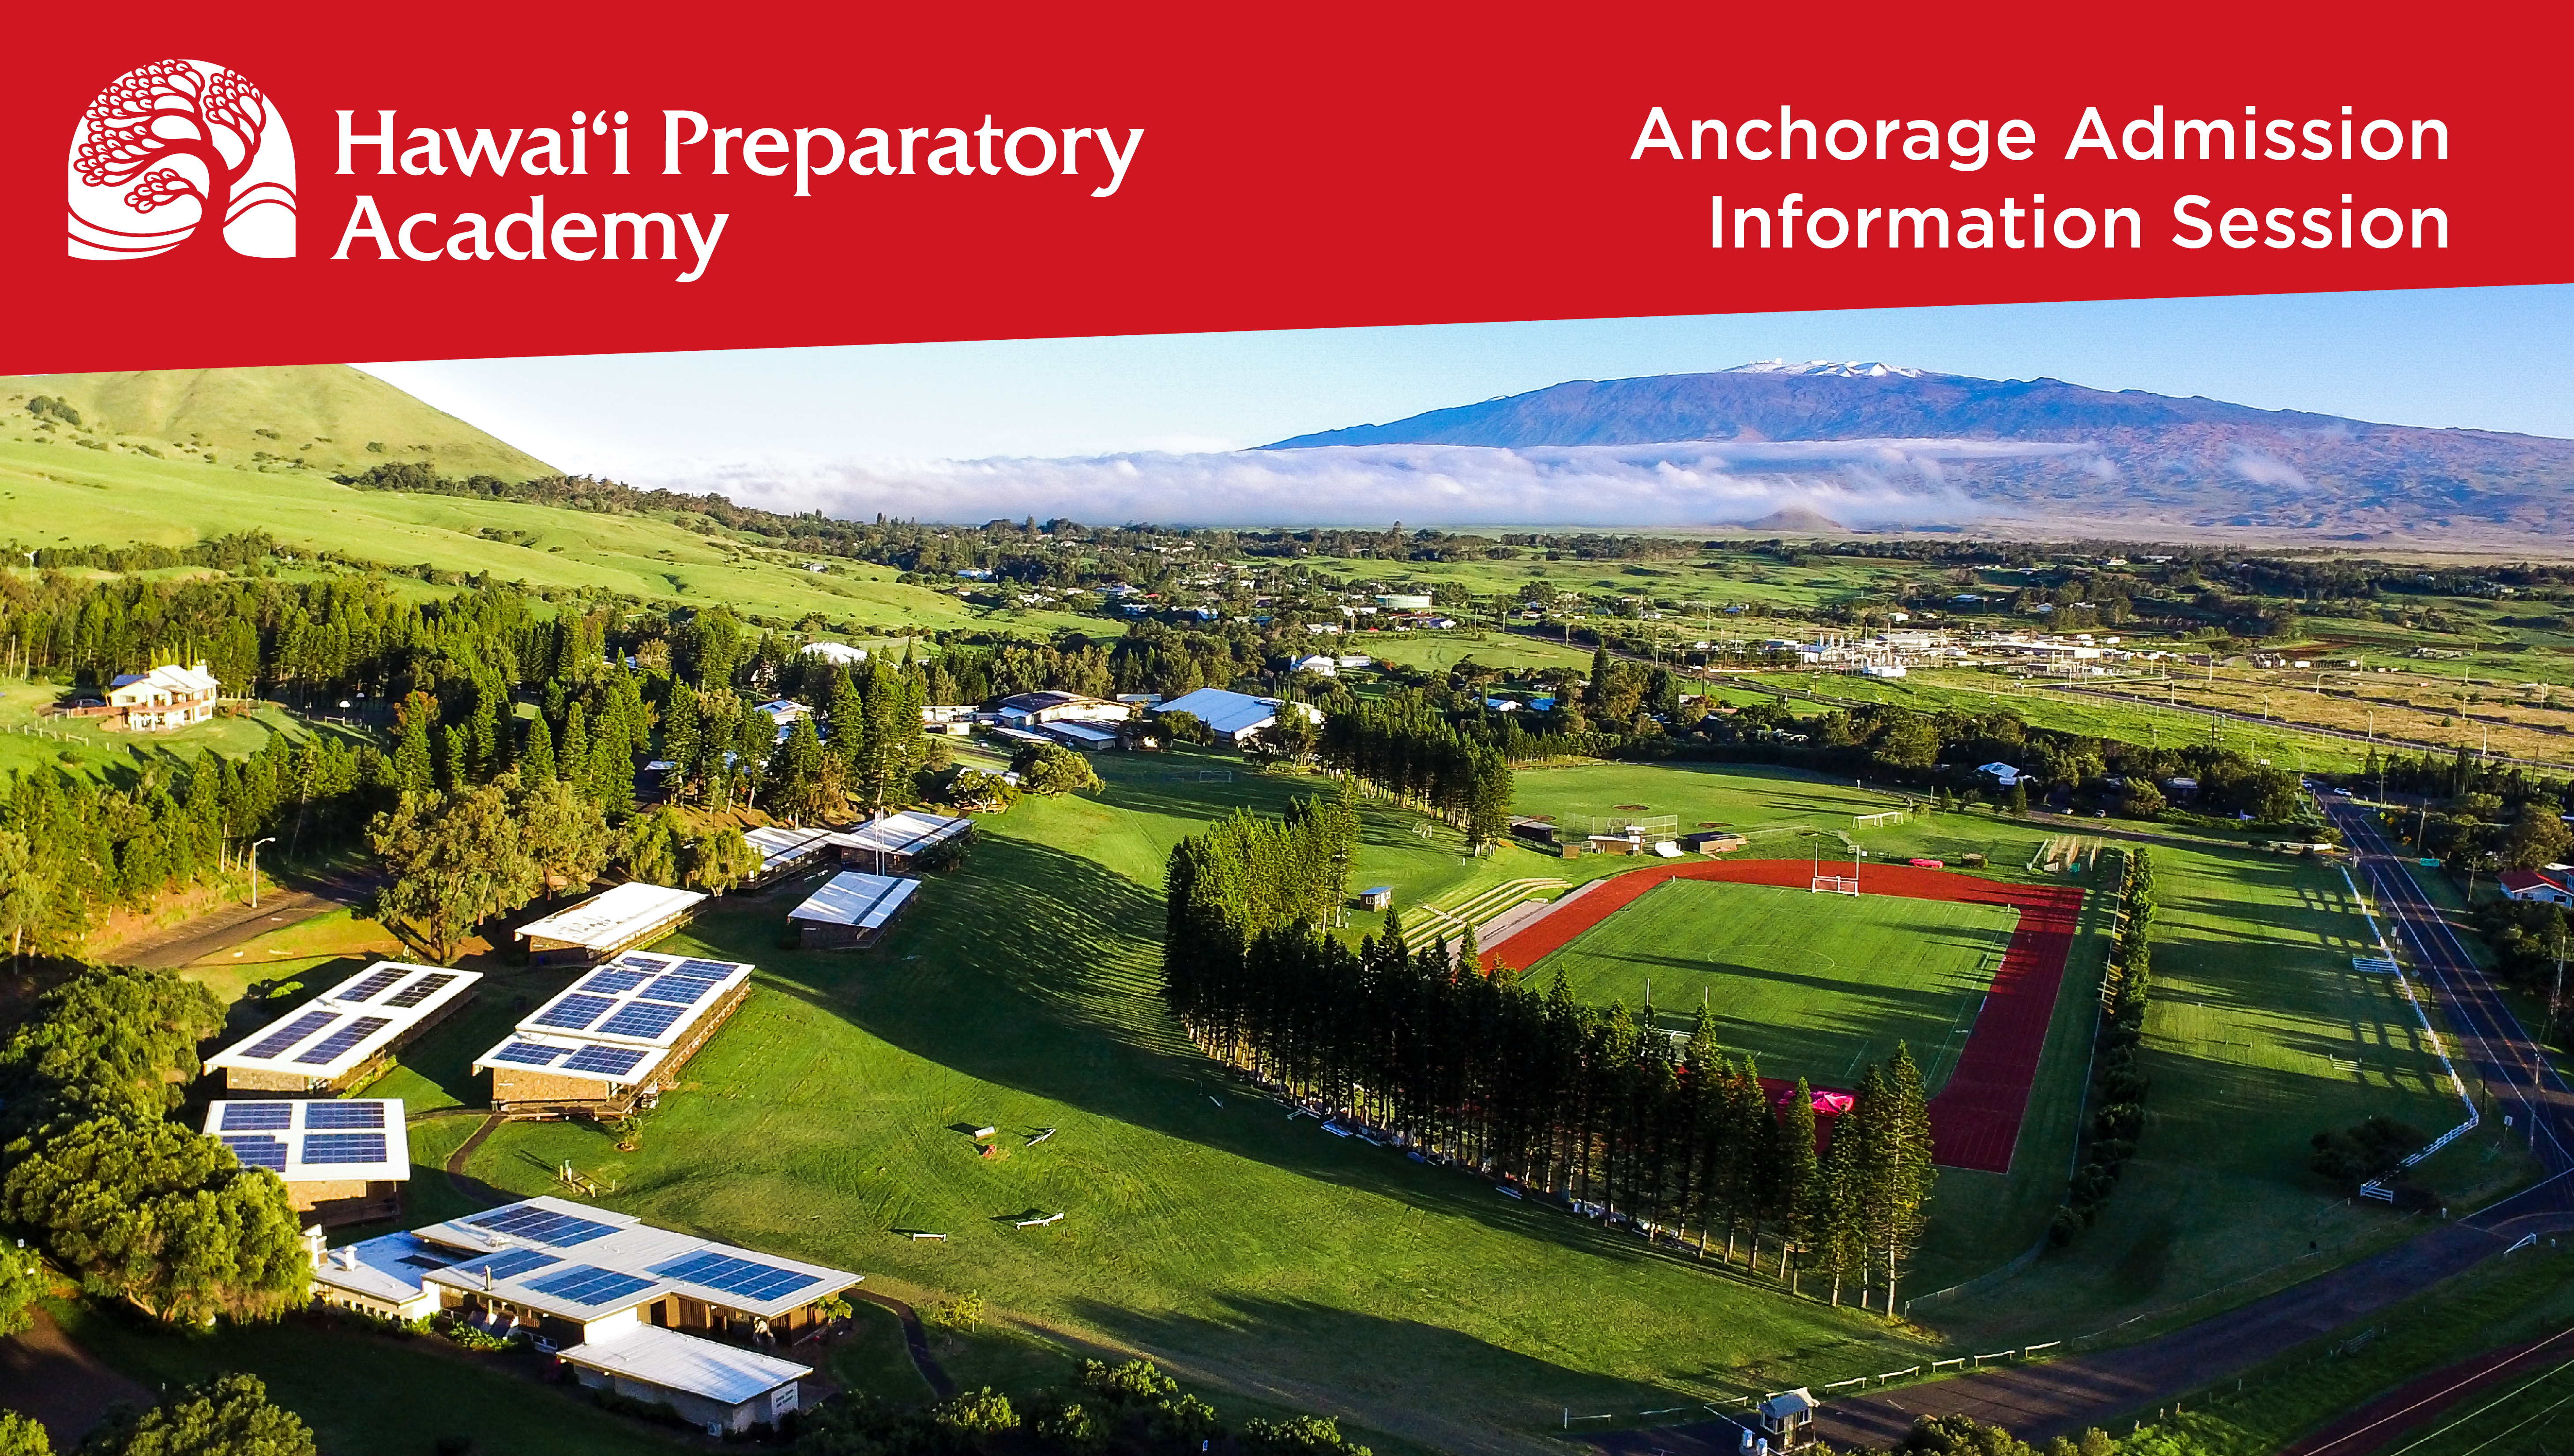 HS_masthead_Anchorage Admission  Information Session